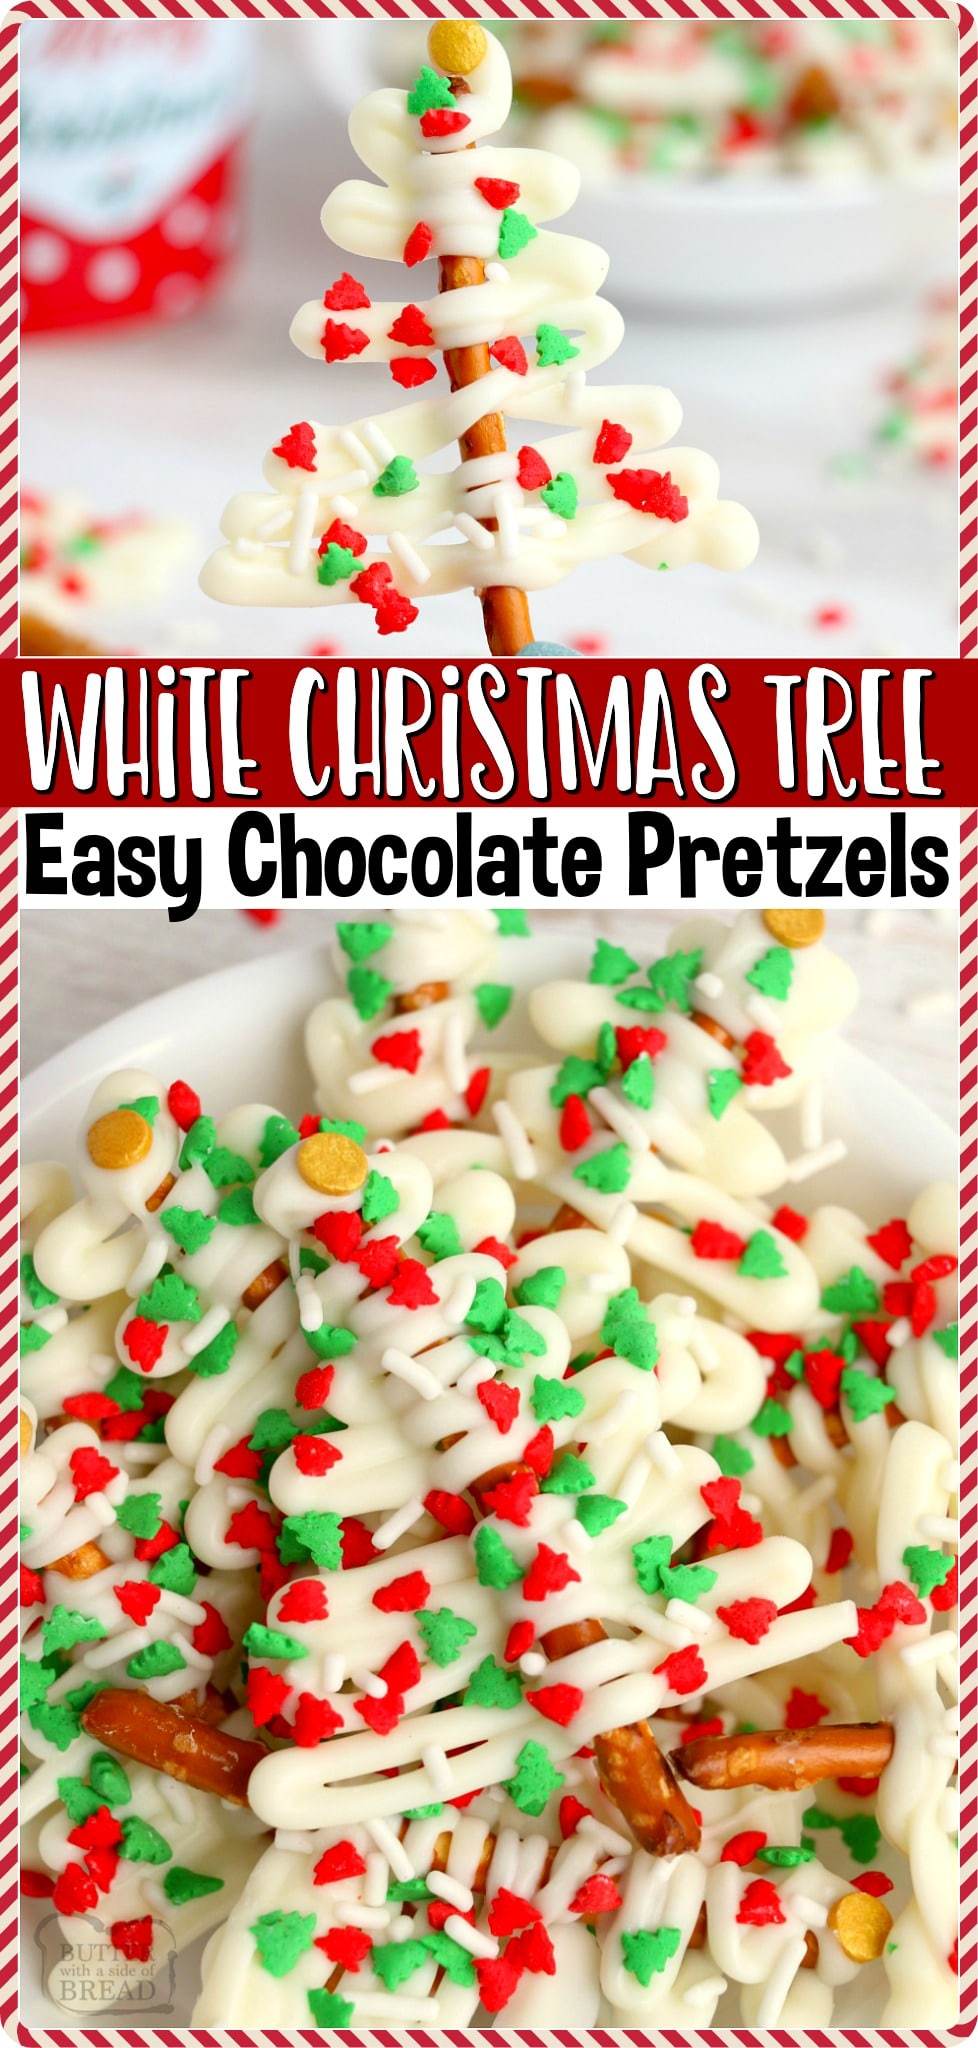 White Christmas Tree Pretzels made with 3 simple ingredients in minutes! Easy, festive white chocolate dessert for cookie trays and Christmas gifts! #Christmas #tree #pretzels #whitechocolate #easyrecipe from BUTTER WITH A SIDE OF BREAD